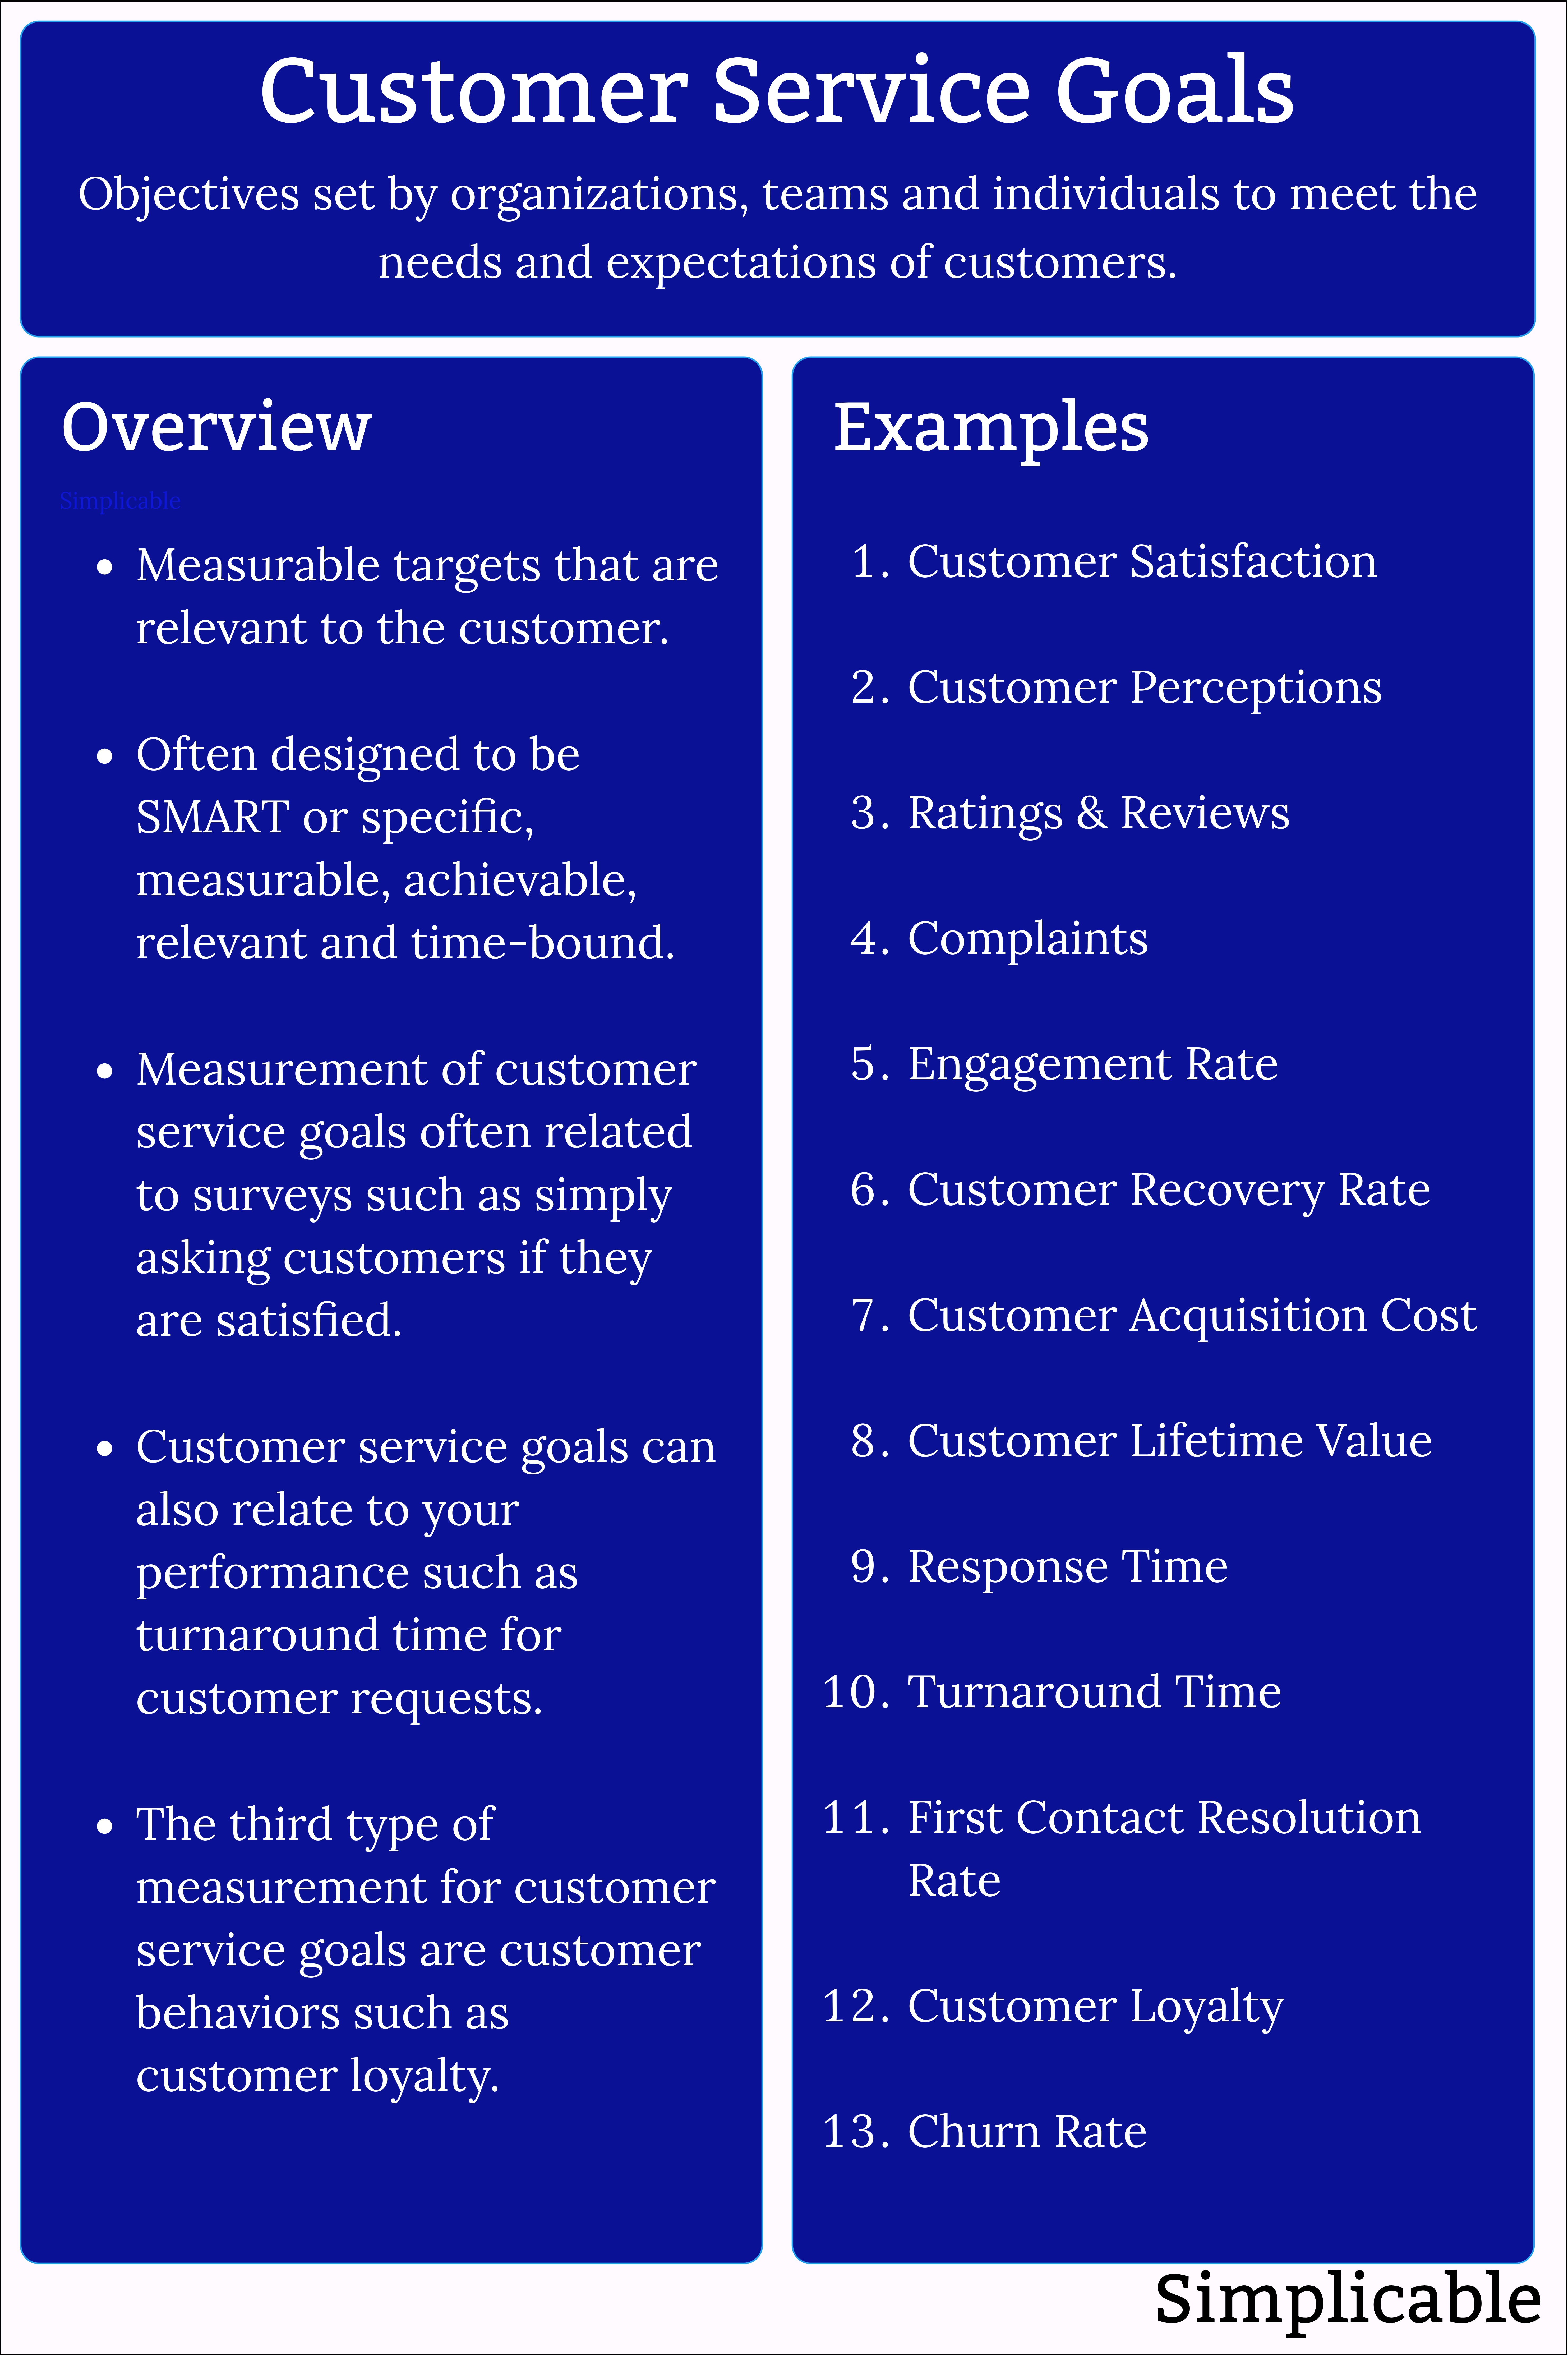 customer service goals overview and examples